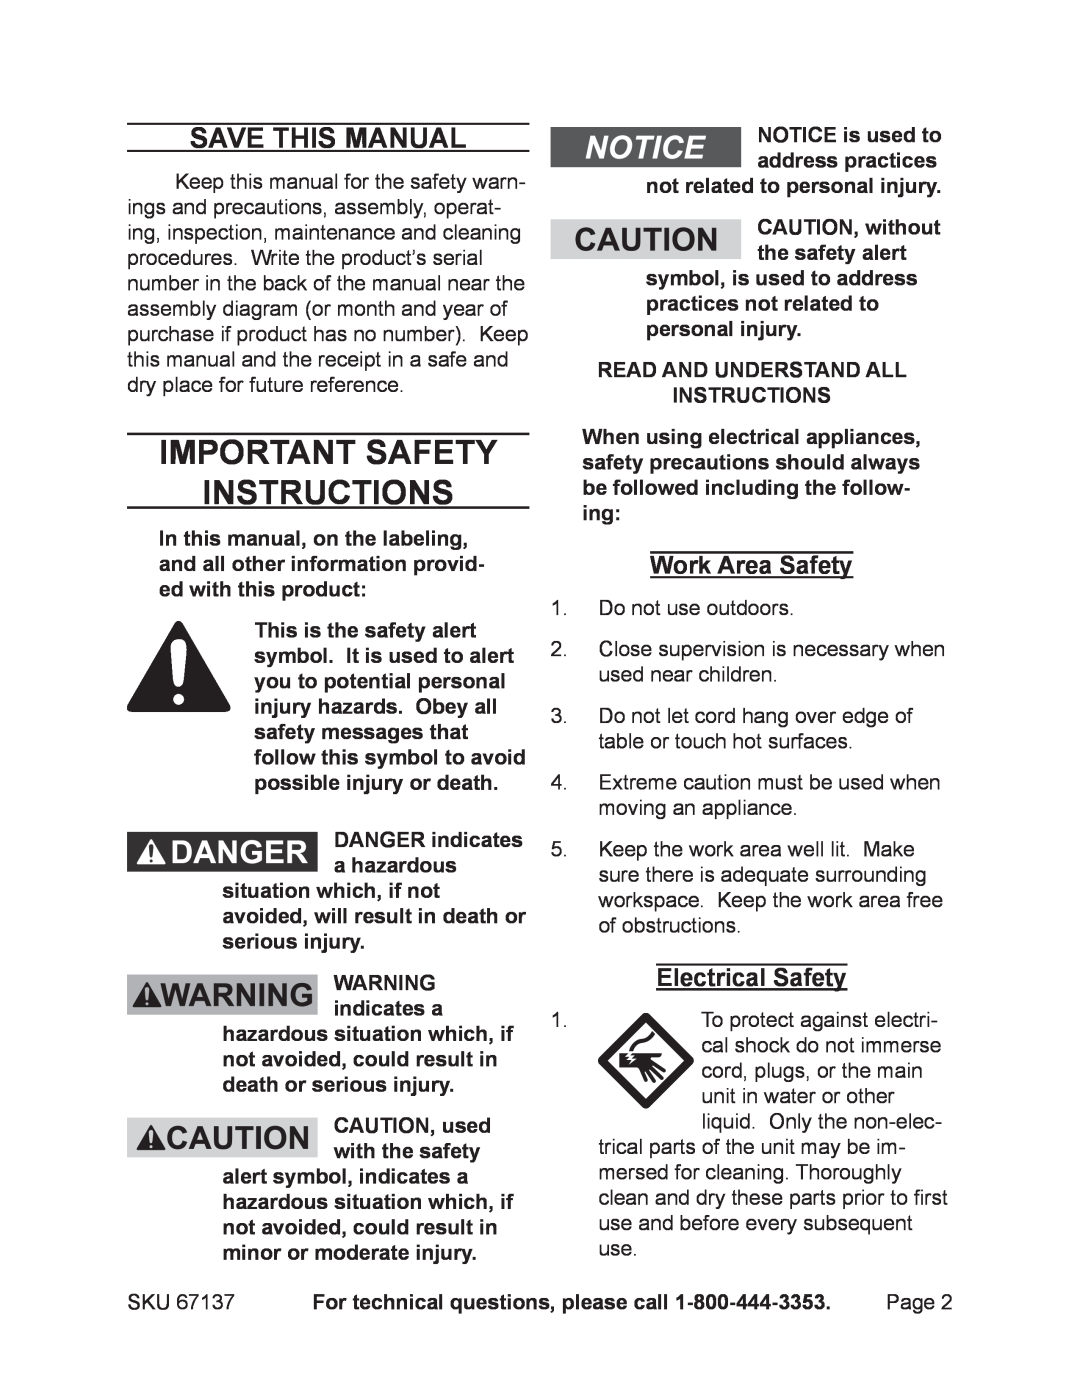 Harbor Freight Tools 67137 manual Important Safety Instructions, Save This Manual, Work Area Safety, Electrical Safety 